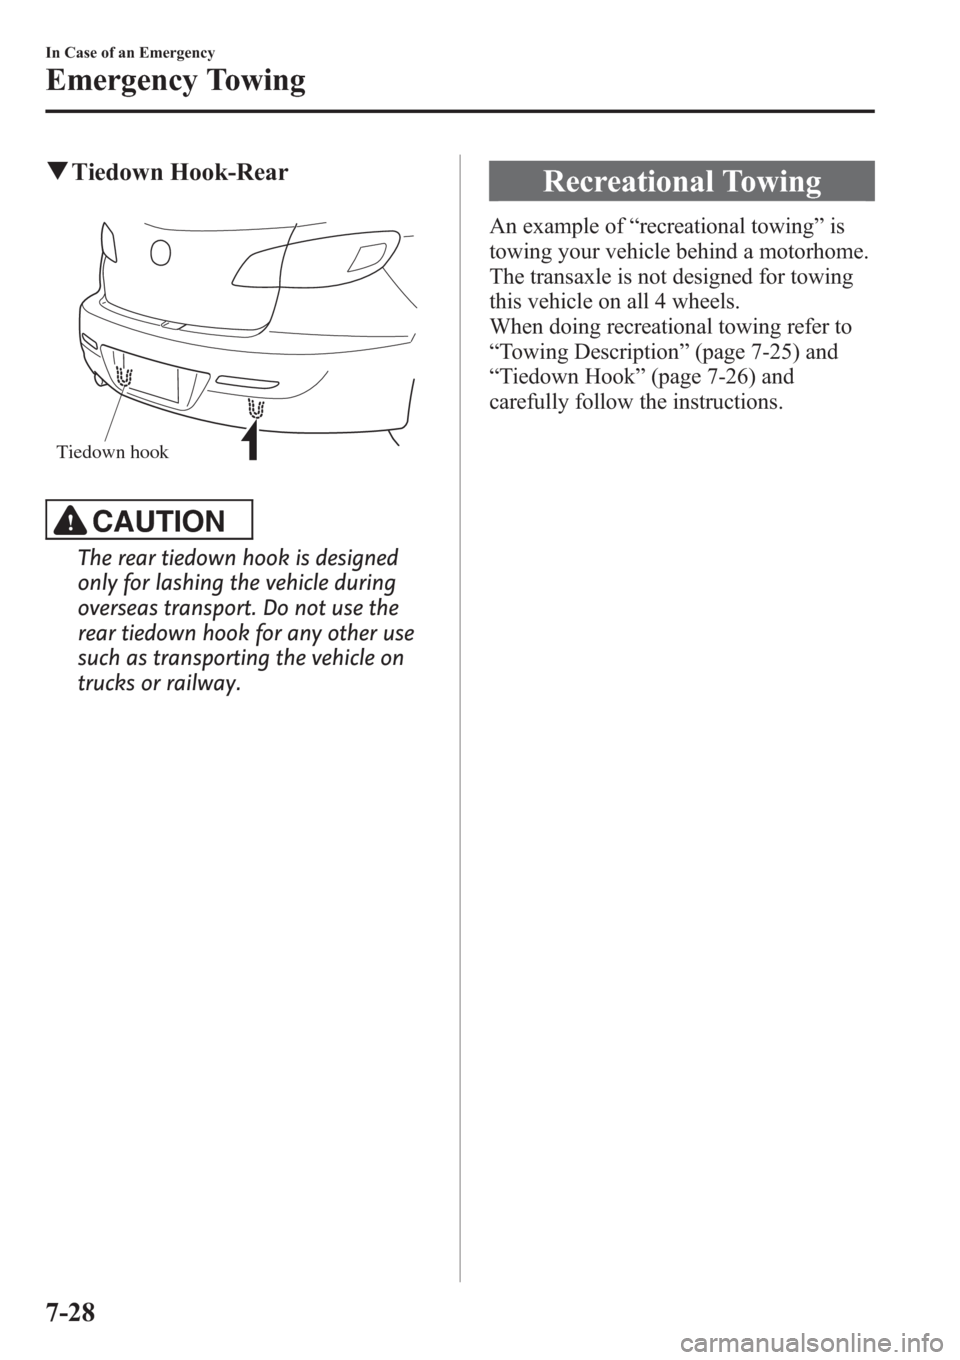 MAZDA MODEL 3 HATCHBACK 2013  Owners Manual (in English) qTiedown Hook-Rear
Tiedown hook
CAUTION
The rear tiedown hook is designed
only for lashing the vehicle during
overseas transport. Do not use the
rear tiedown hook for any other use
such as transportin